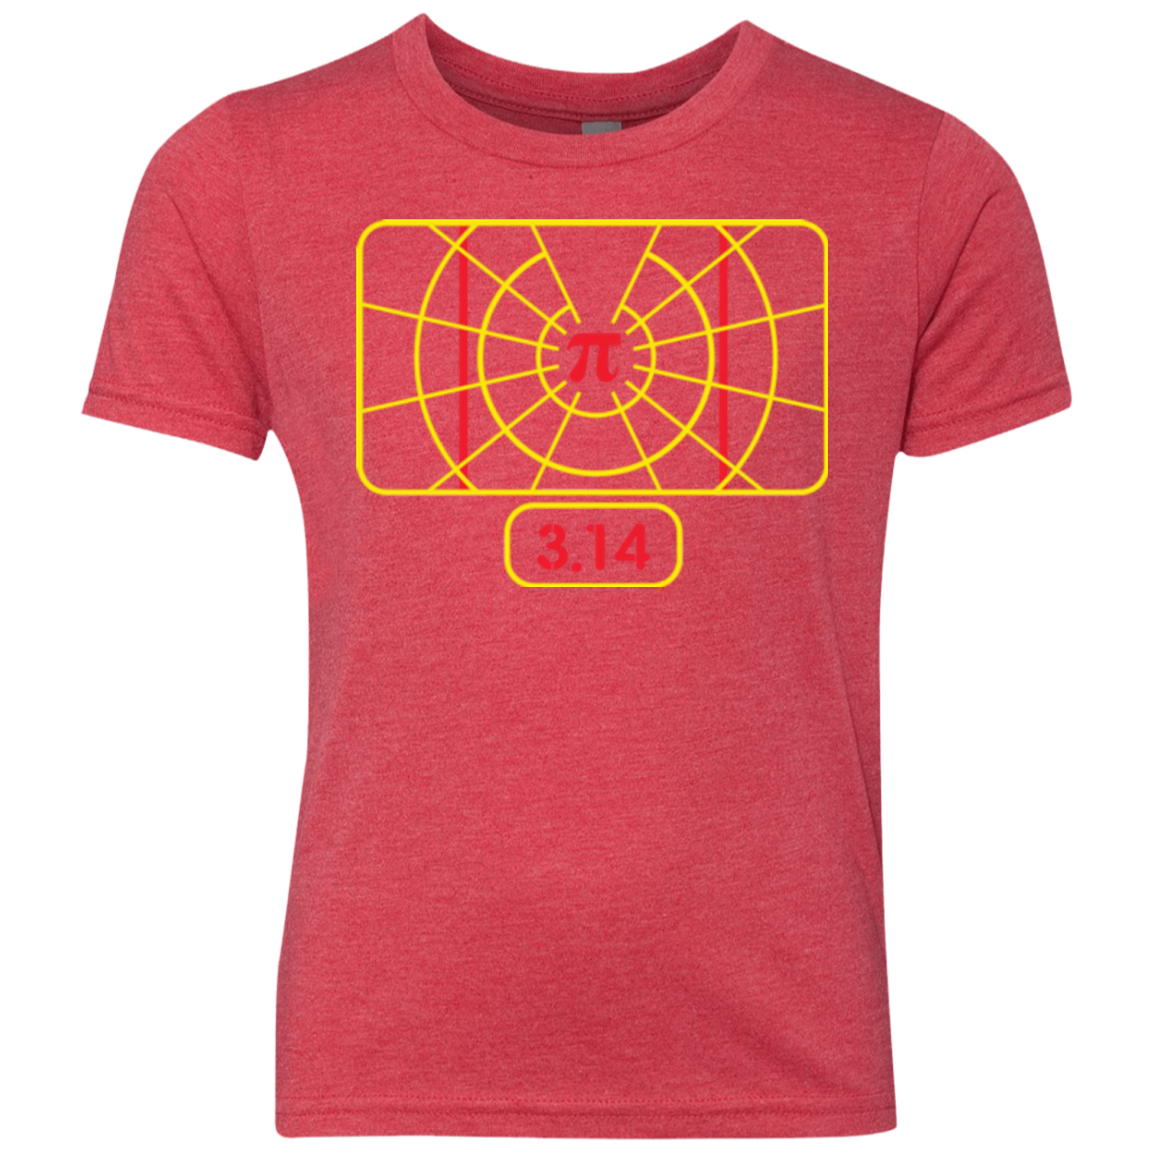 Stay on Pi Youth Triblend T-Shirt